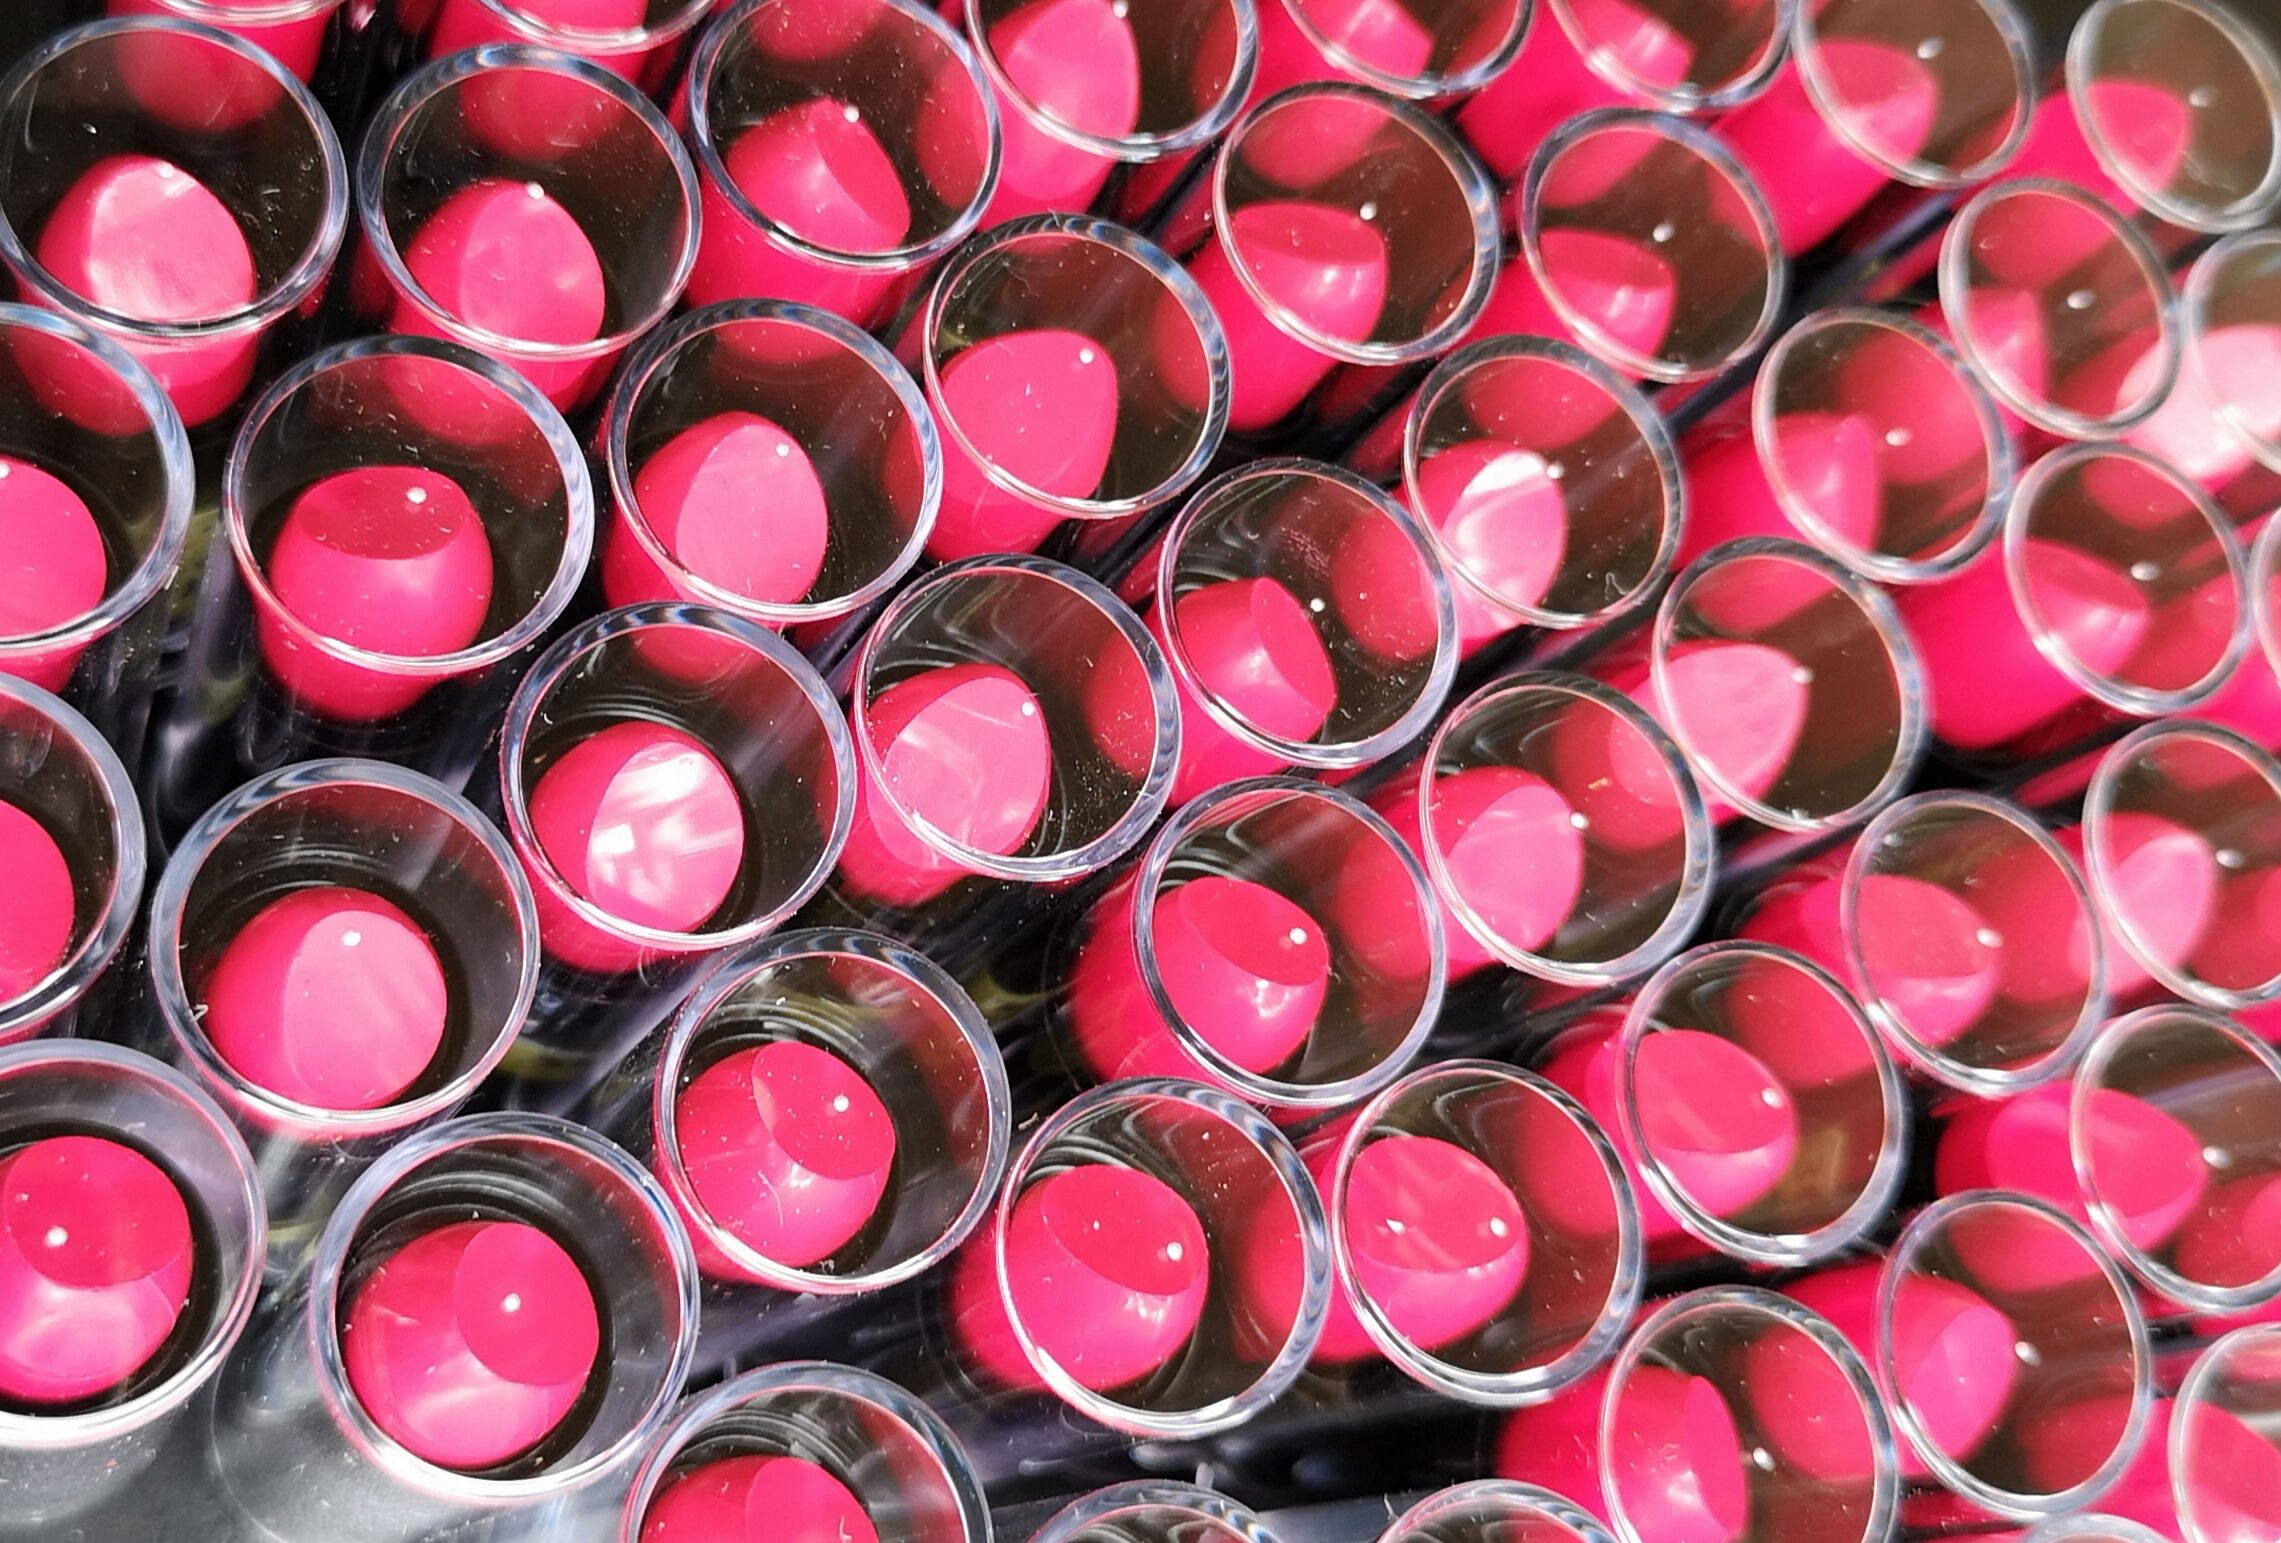 Read more about the article Anomera develops improved lipsticks using biodegradable cellulose